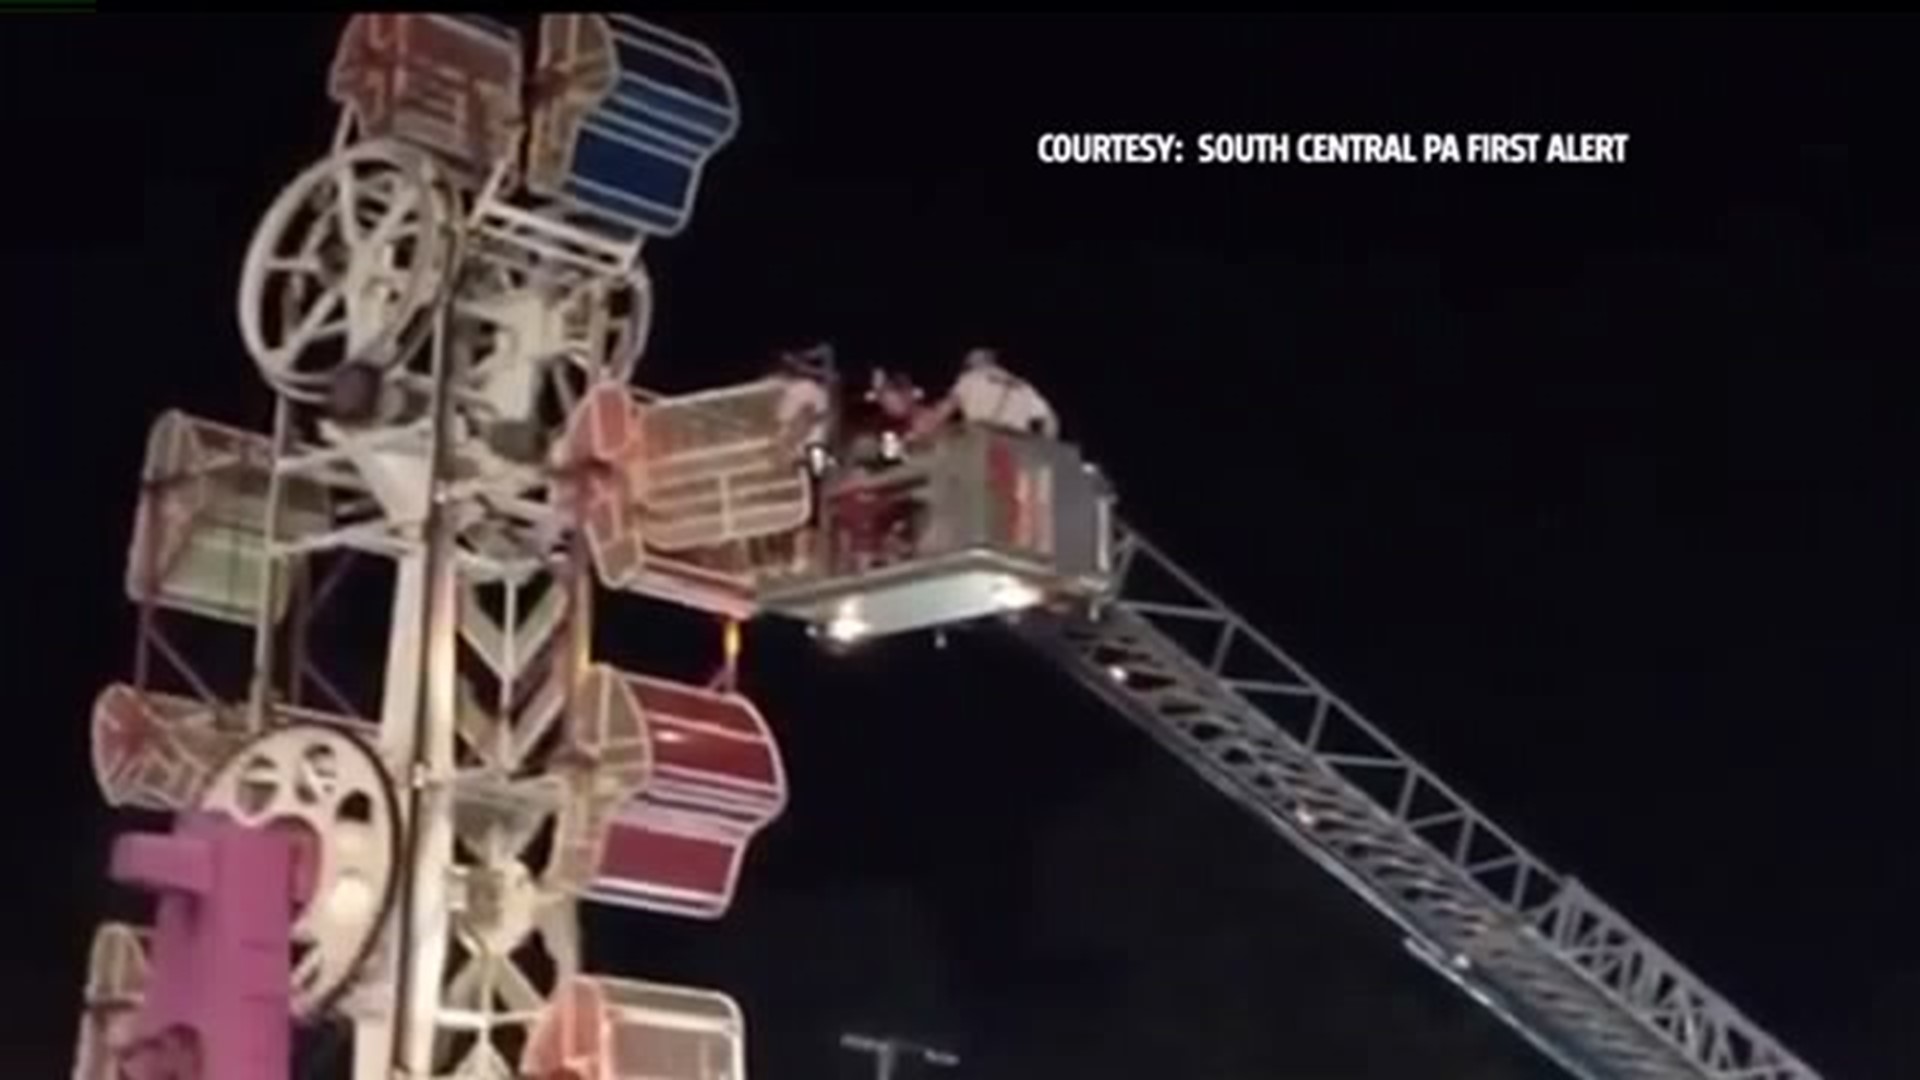 Fairgoers trapped on ride at Shippensburg Fair